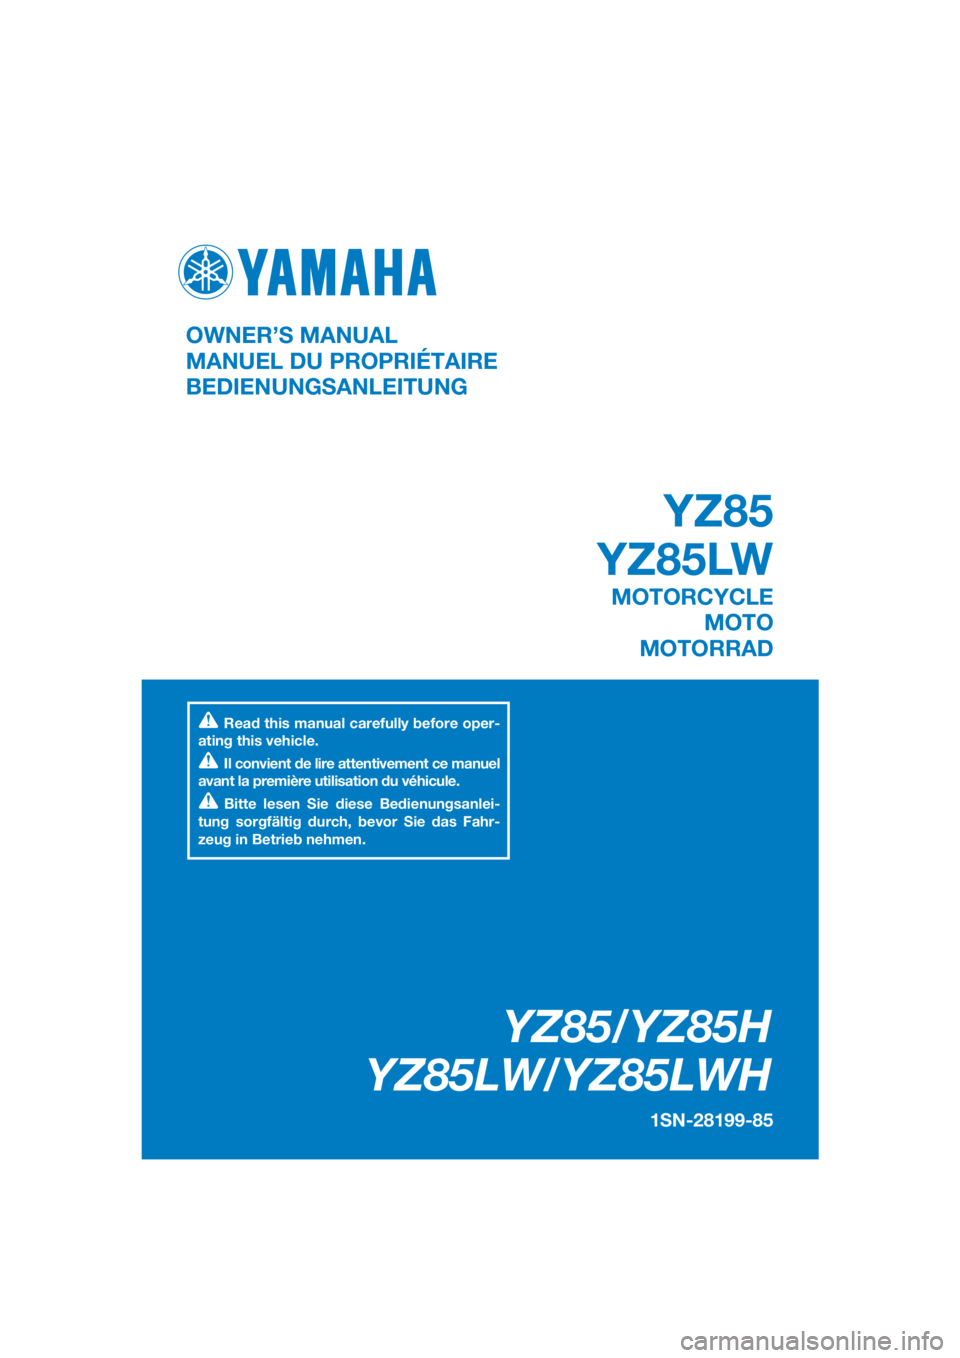 YAMAHA YZ85 2017  Notices Demploi (in French) DIC183
YZ85/YZ85H
YZ85LW/YZ85LWH
1SN-28199-85
OWNER’S MANUAL
MANUEL DU PROPRIÉTAIRE
BEDIENUNGSANLEITUNG
Read this manual carefully before oper-
ating this vehicle.
Il convient de lire attentivement